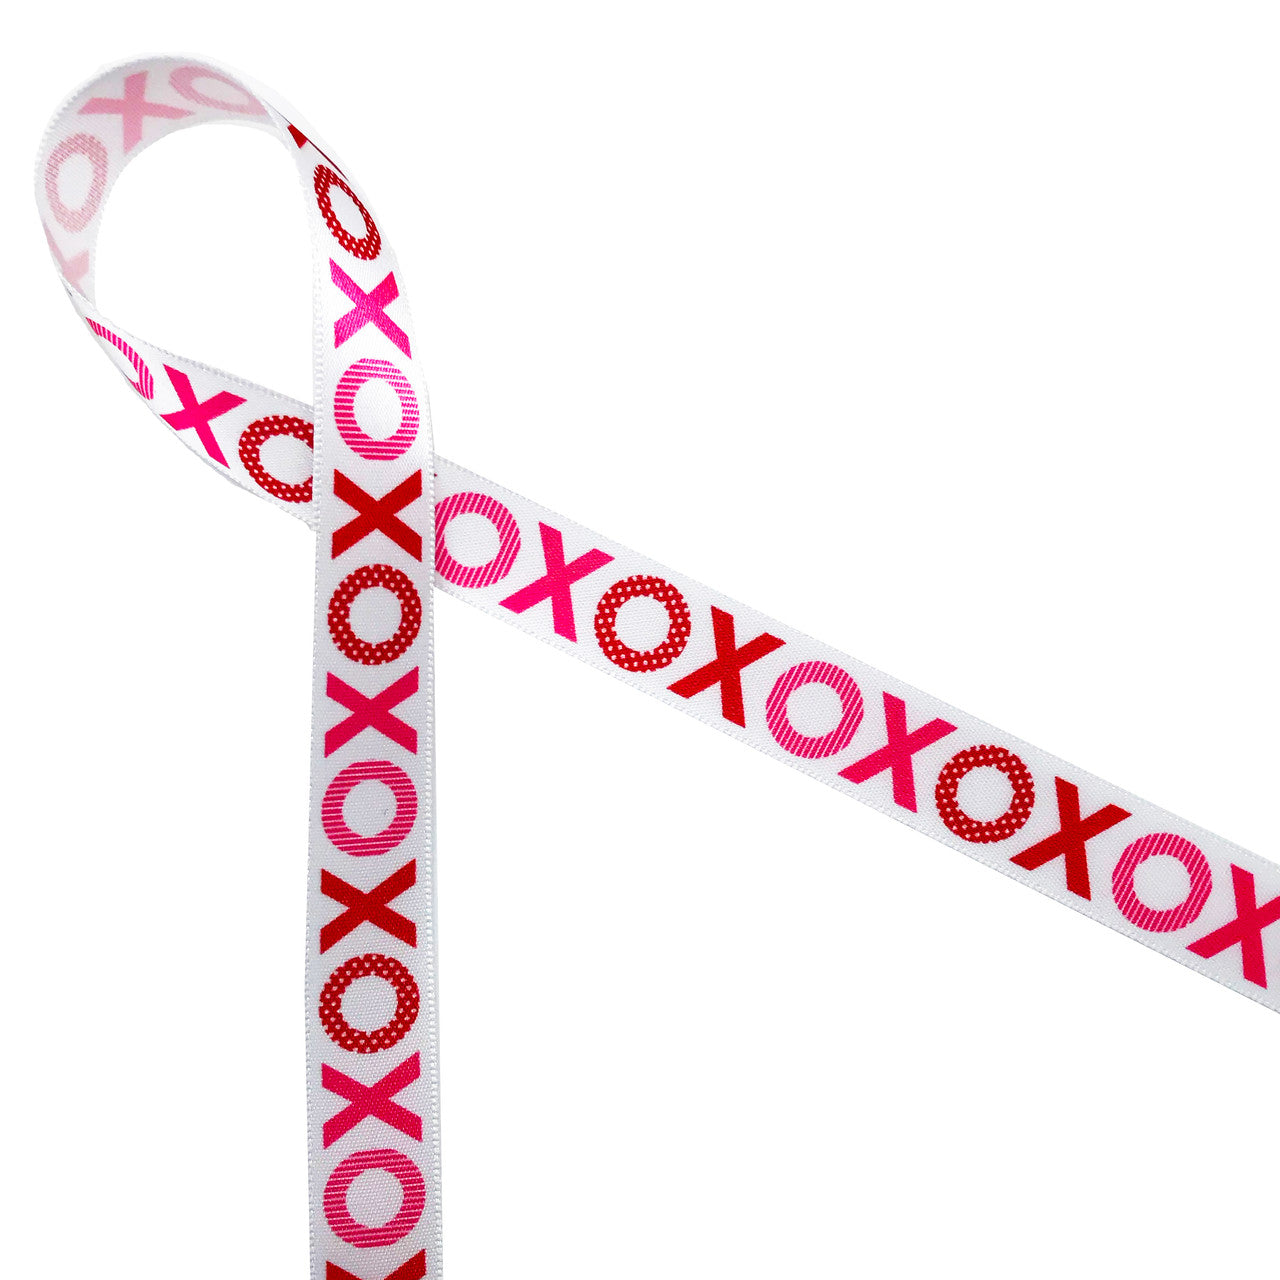 Valentine Hugs and Kisses ribbon X's and O's in pink and red printed on 5/8" white single face satin